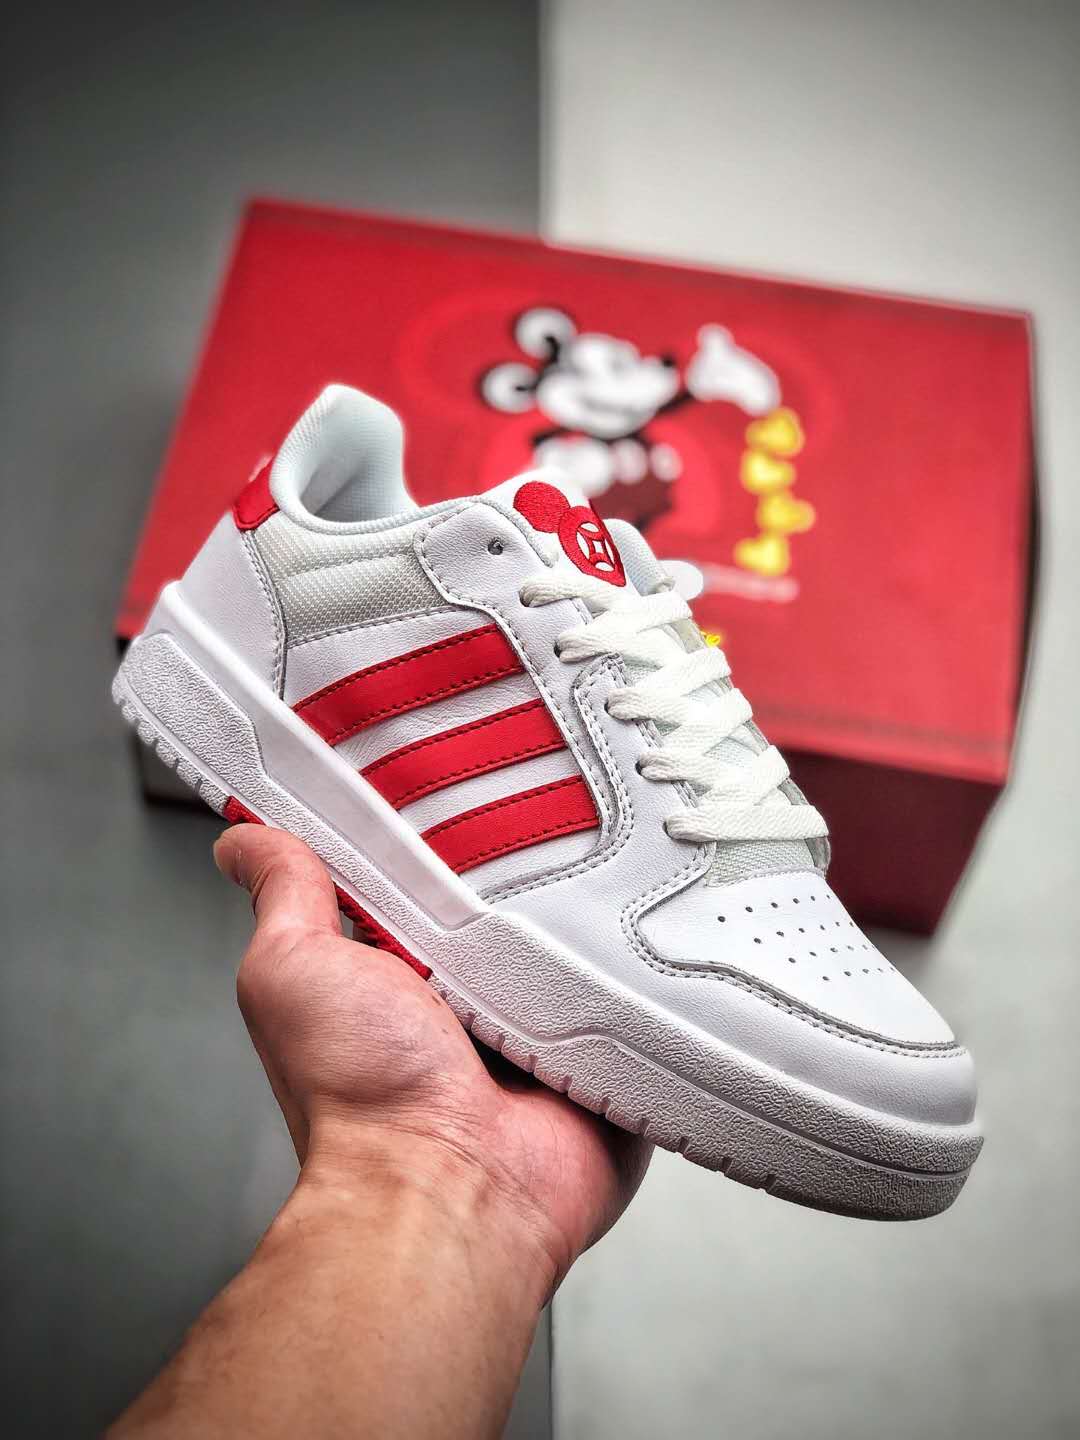 Adidas Neo Entrap Disney White Red FW7010: Vibrant and Playful Disney Collaboration